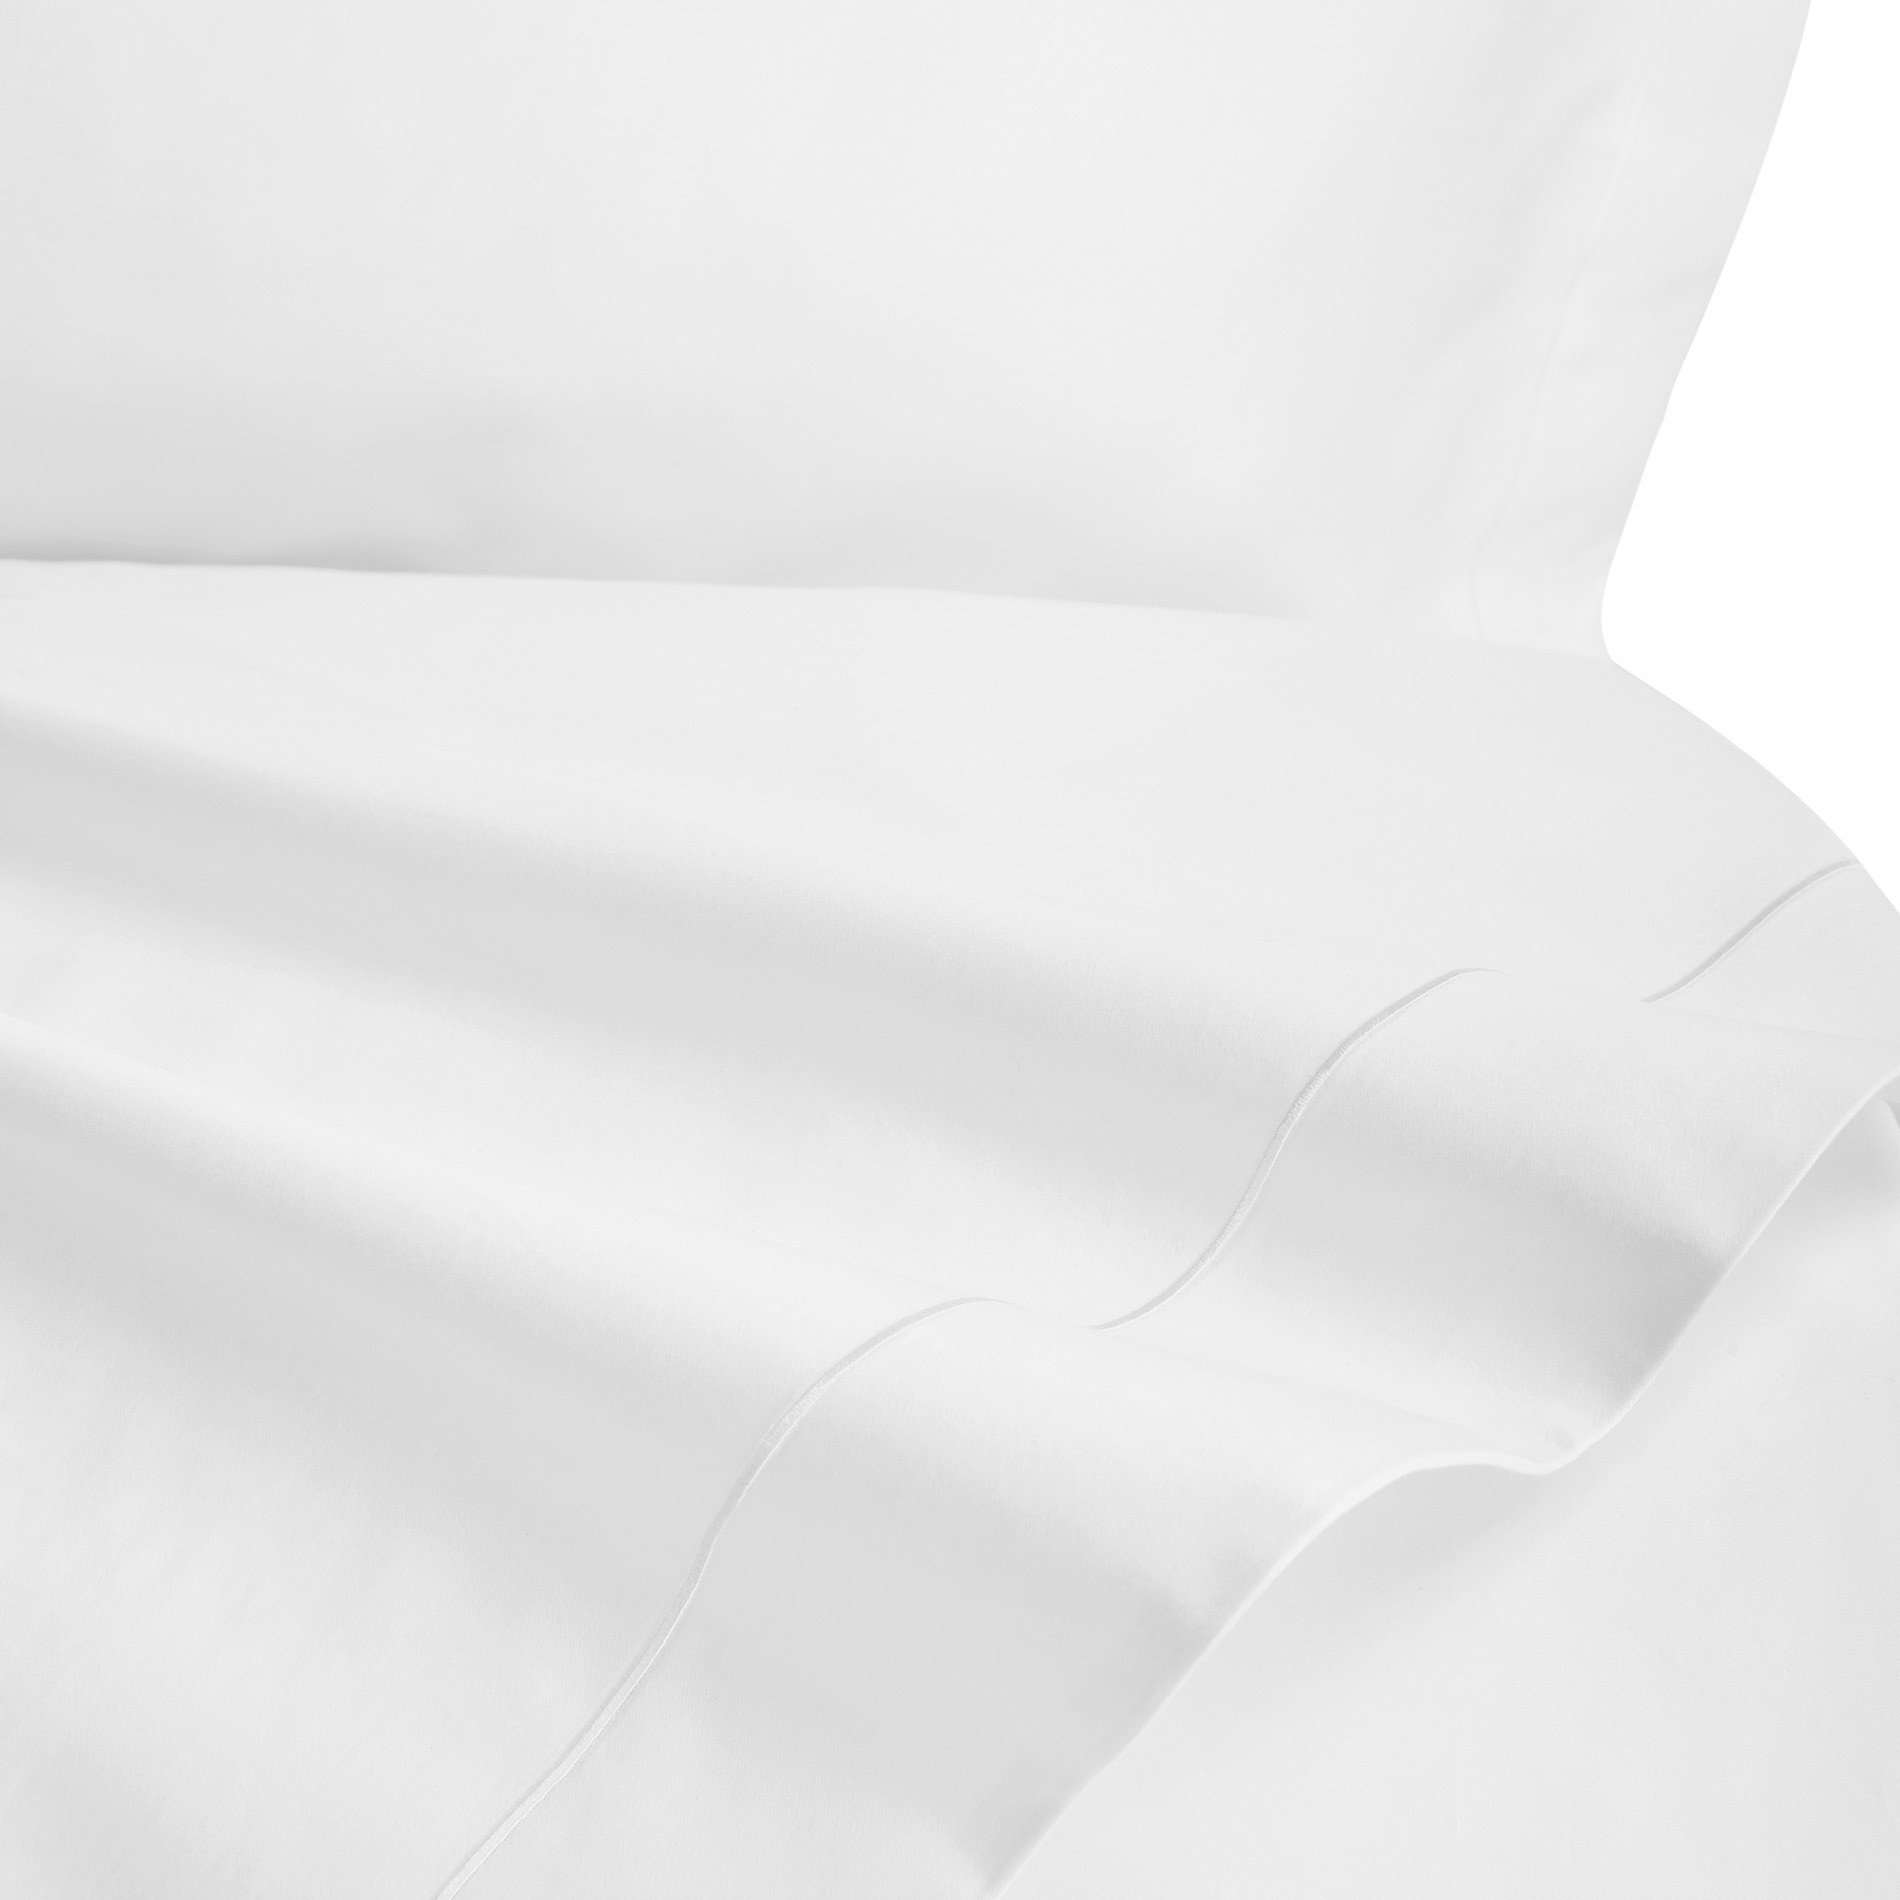 Duvet cover in TC400 satin cotton, White 2, large image number 2